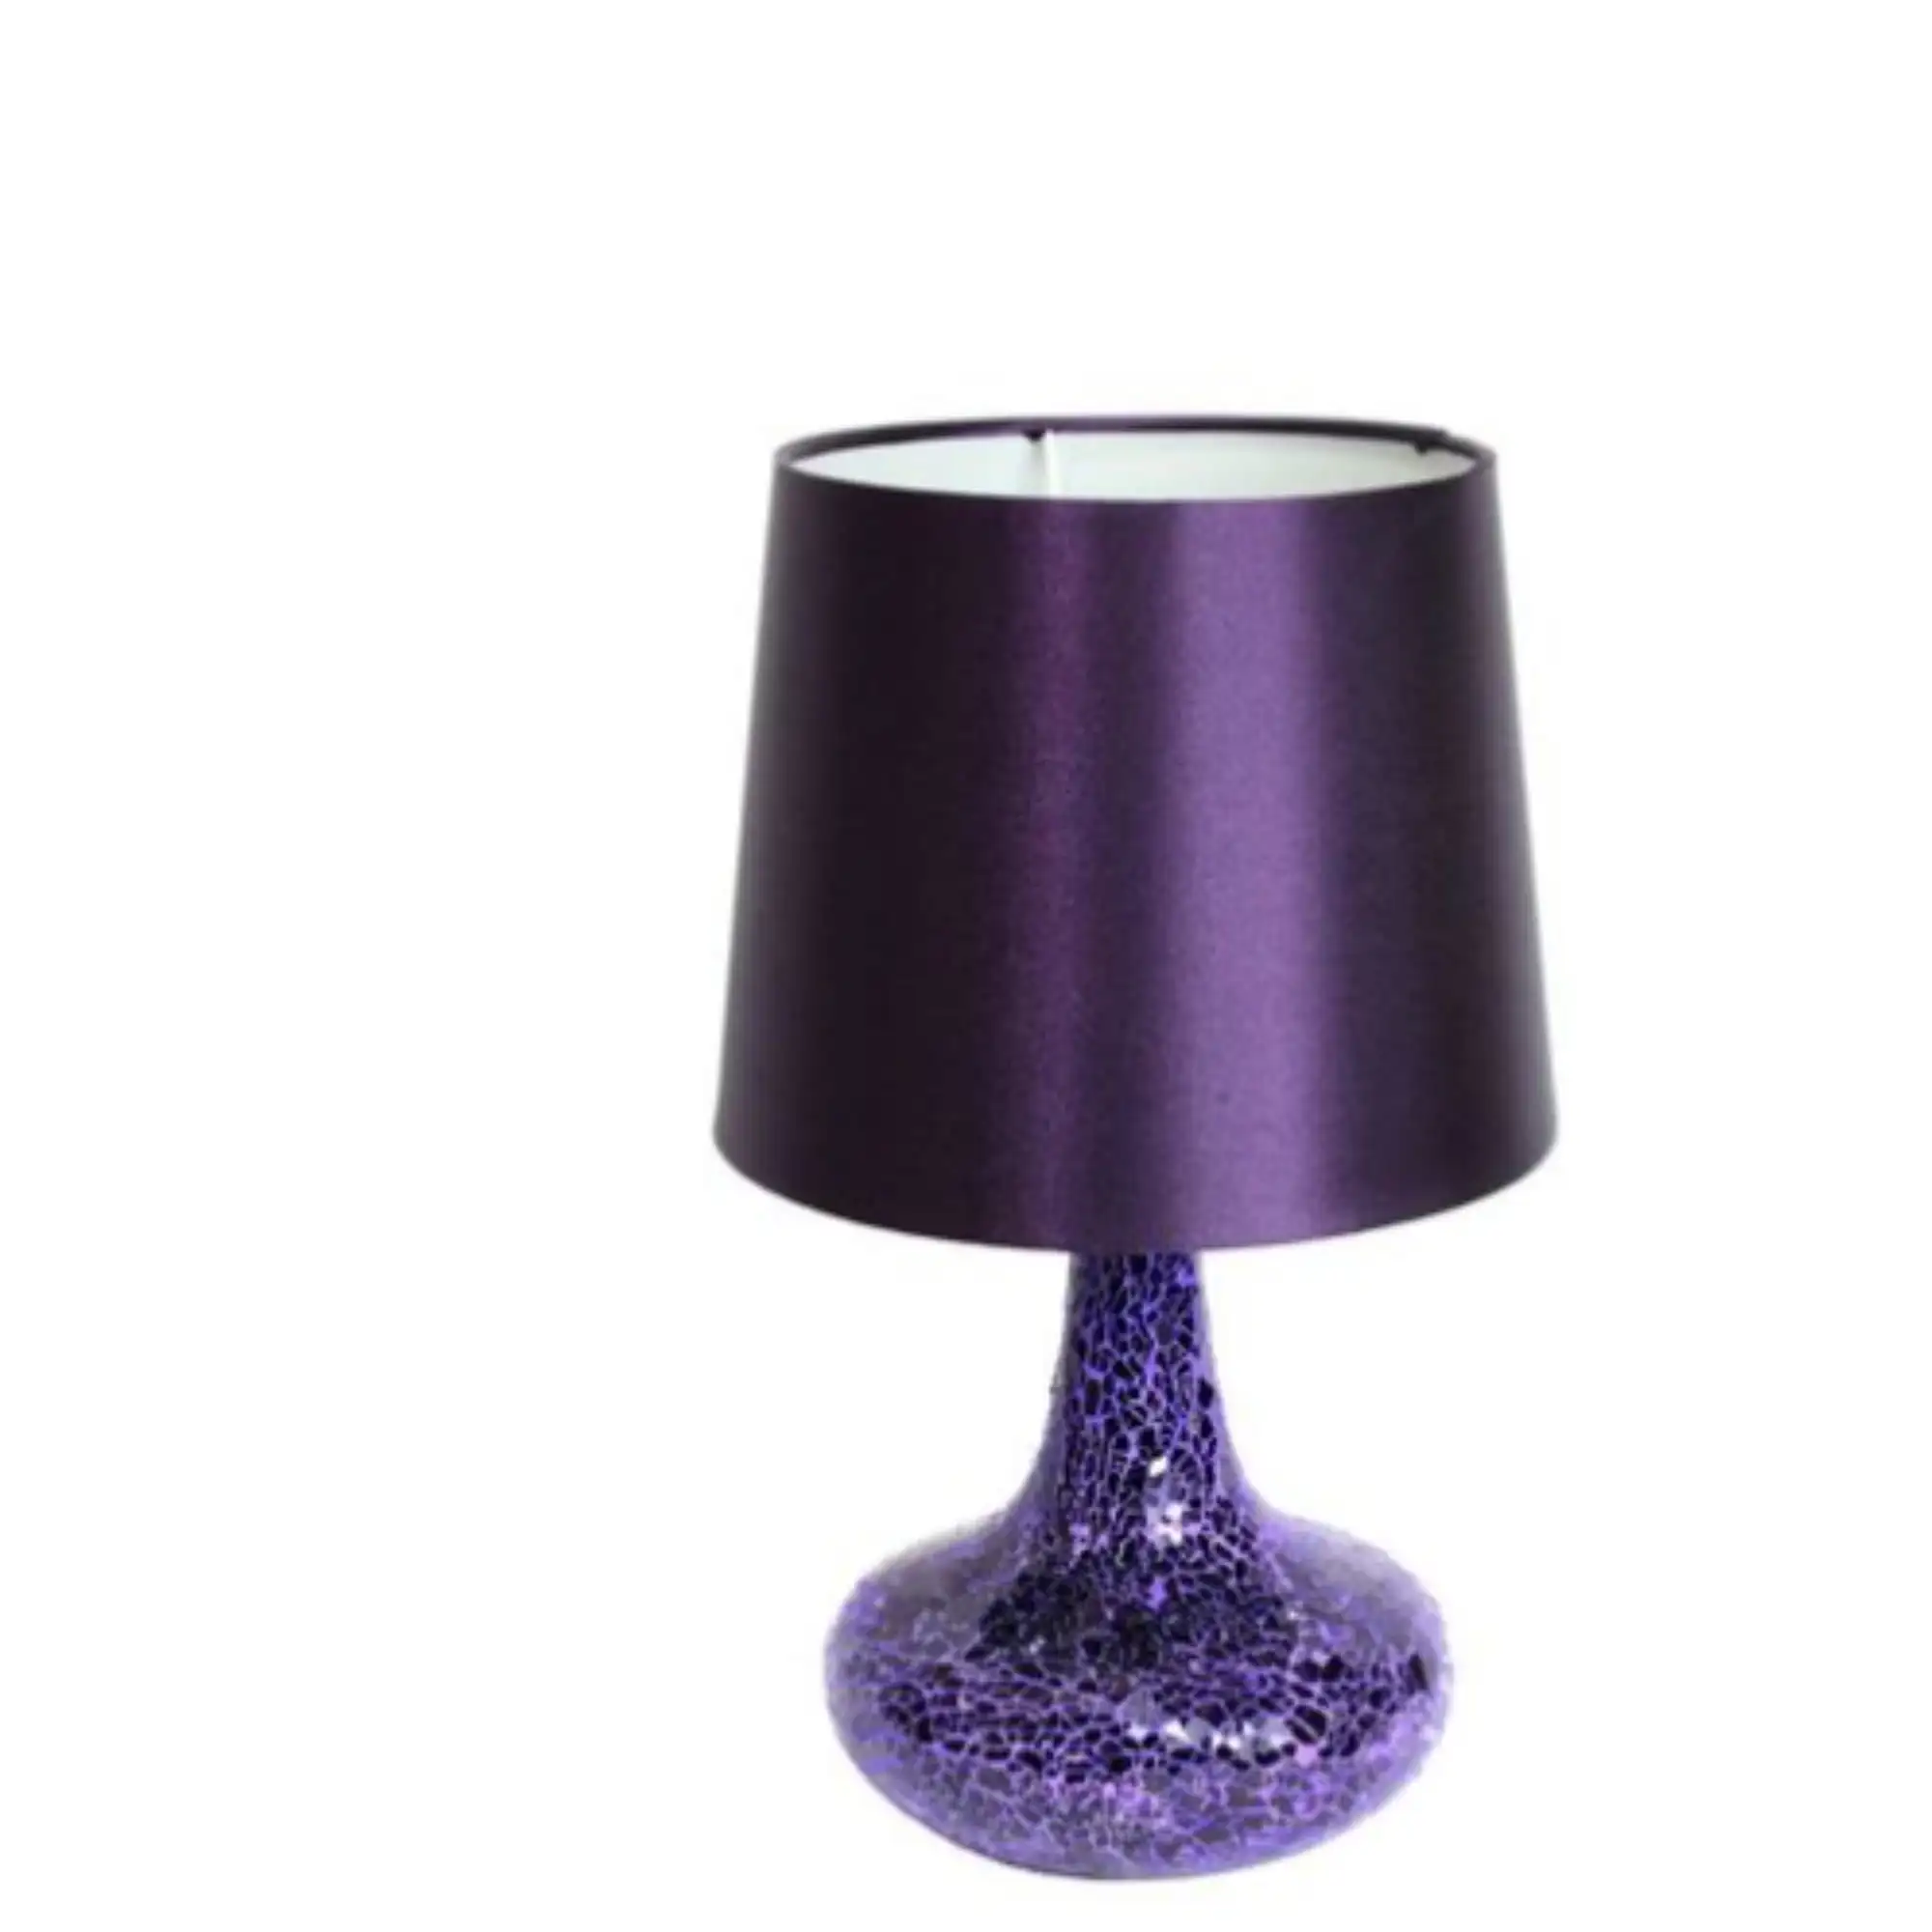 

Mosaic Tiled Glass Genie Table Lamp with Fabric Shade